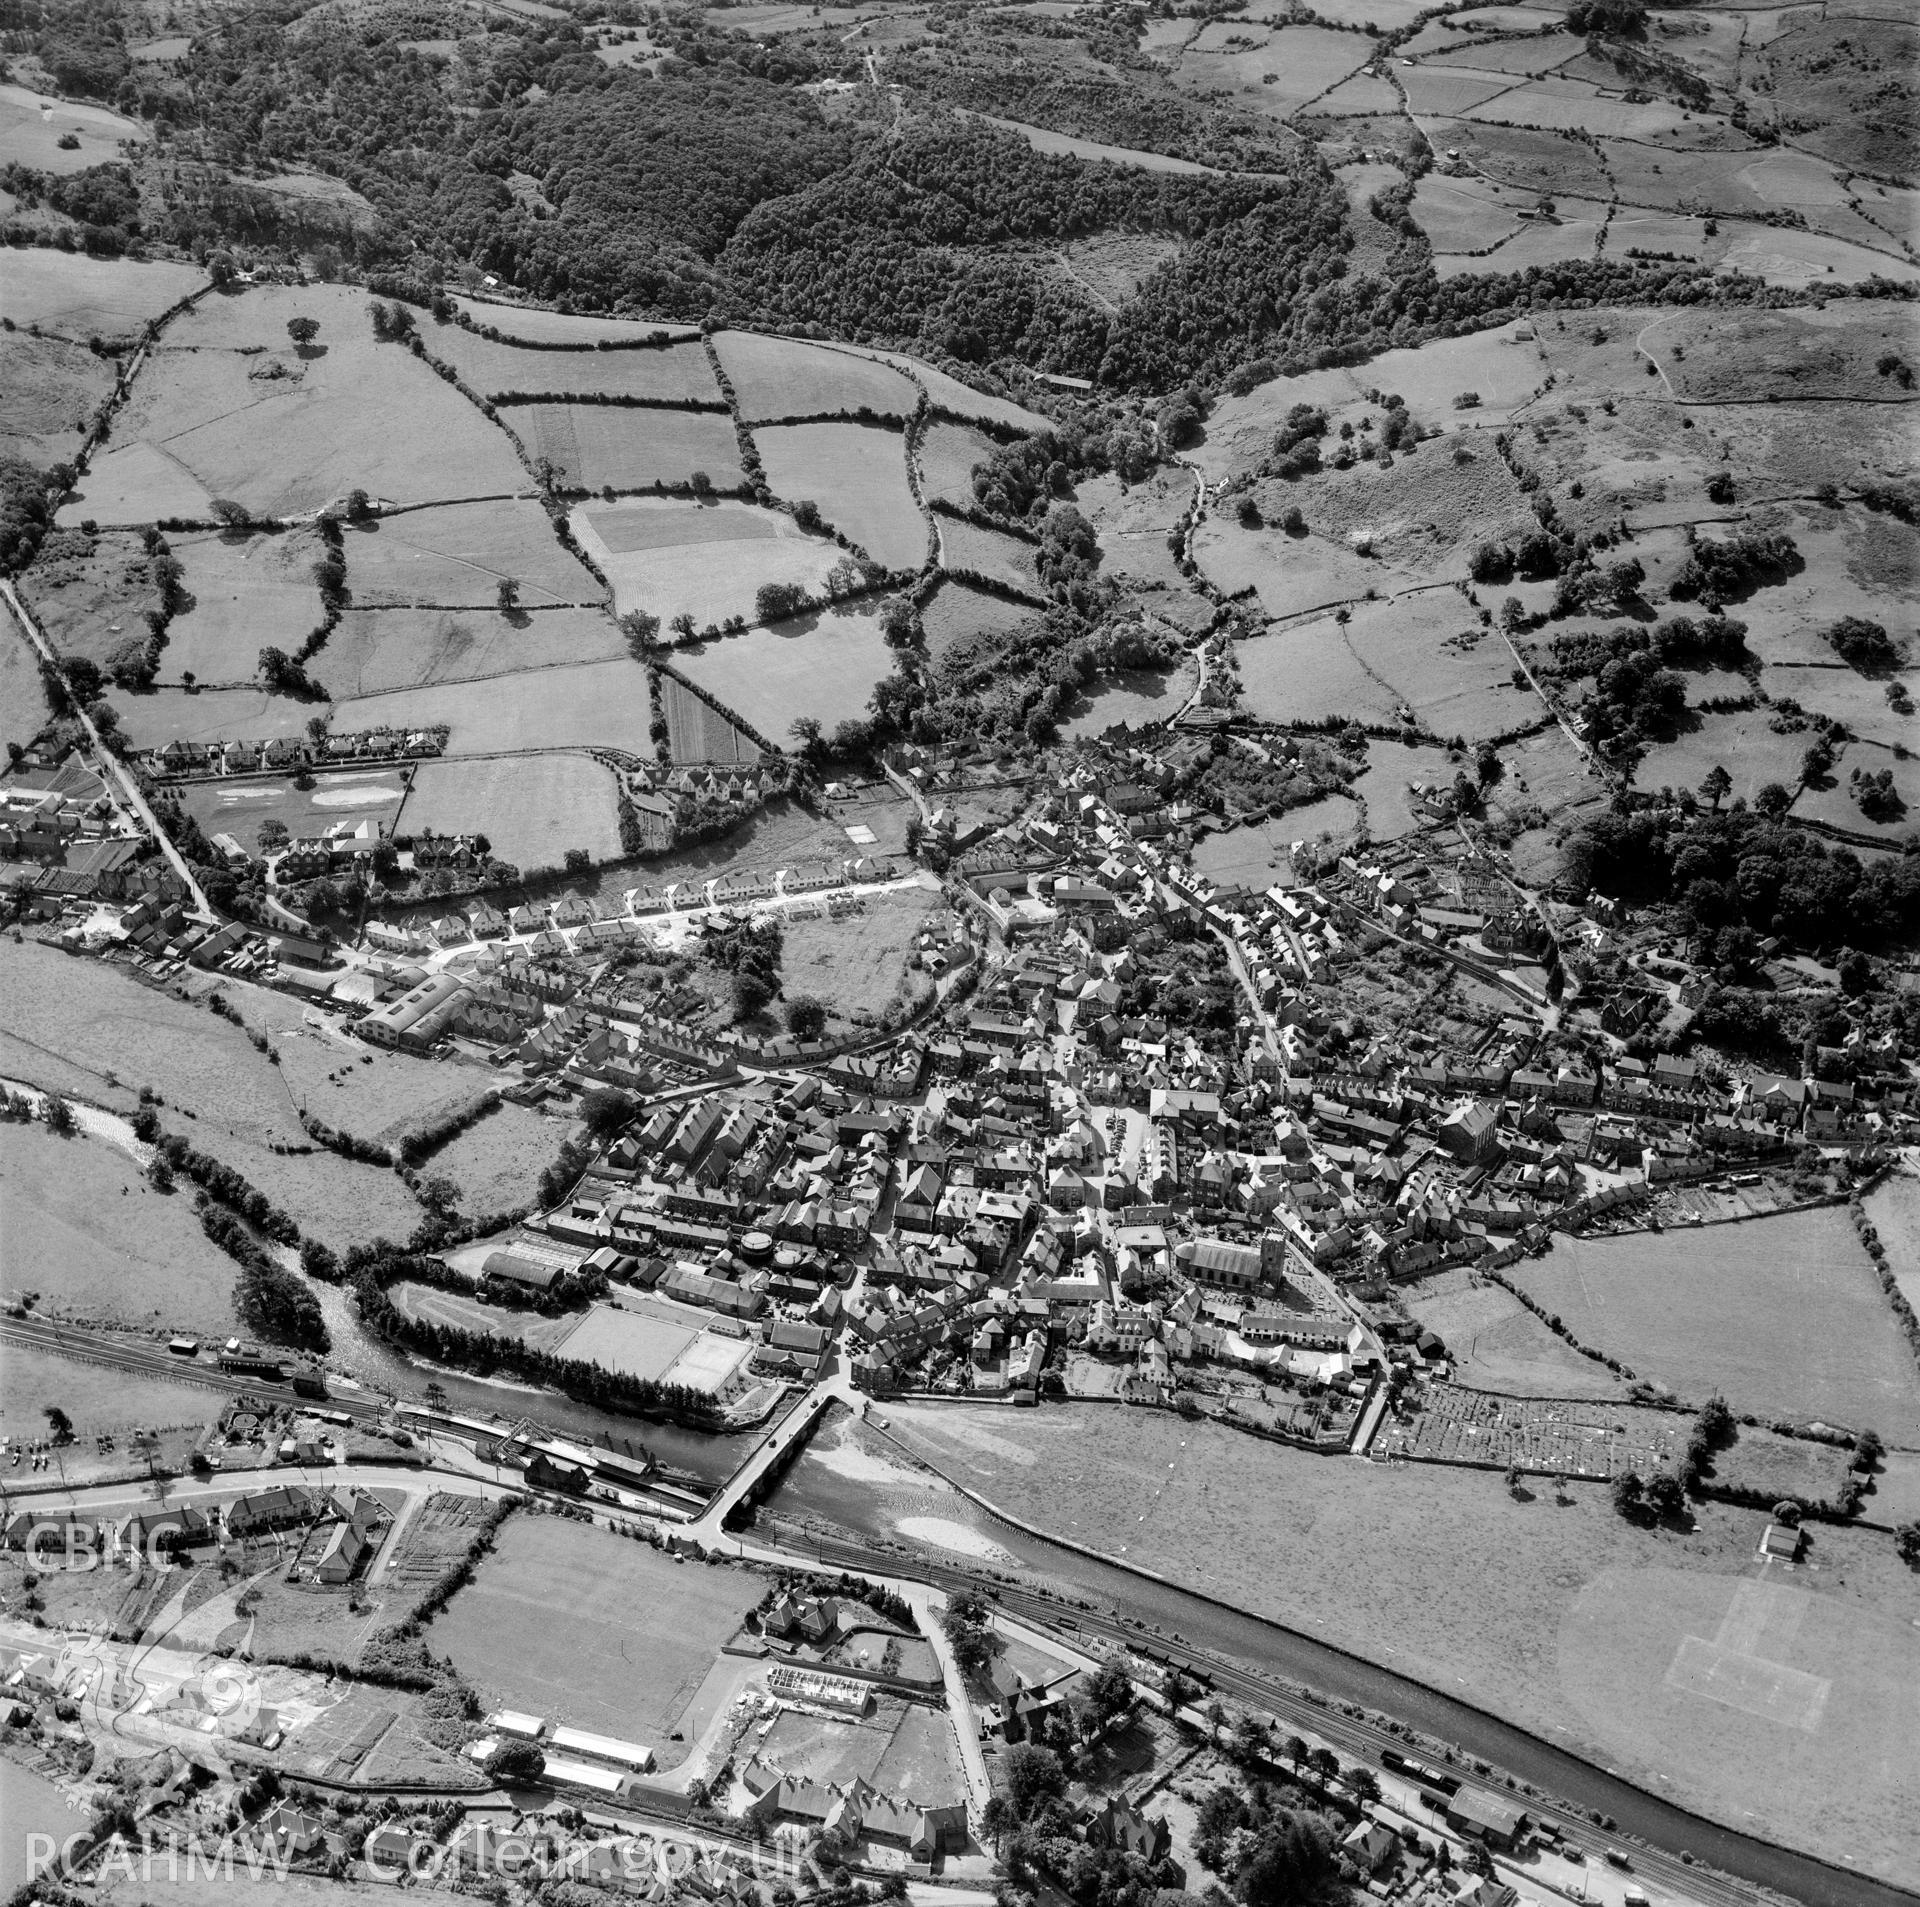 Black and white oblique aerial photograph showing Dolgellau,View of the town looking south-east; the post-war housing boom is represented by houses under construction in Ffordd y Felin (centre left) and Ardd Fawr (bottom left). From Aerofilms album Merionethshire and Montgomeryshire, taken by Aerofilms Ltd and dated 1950.